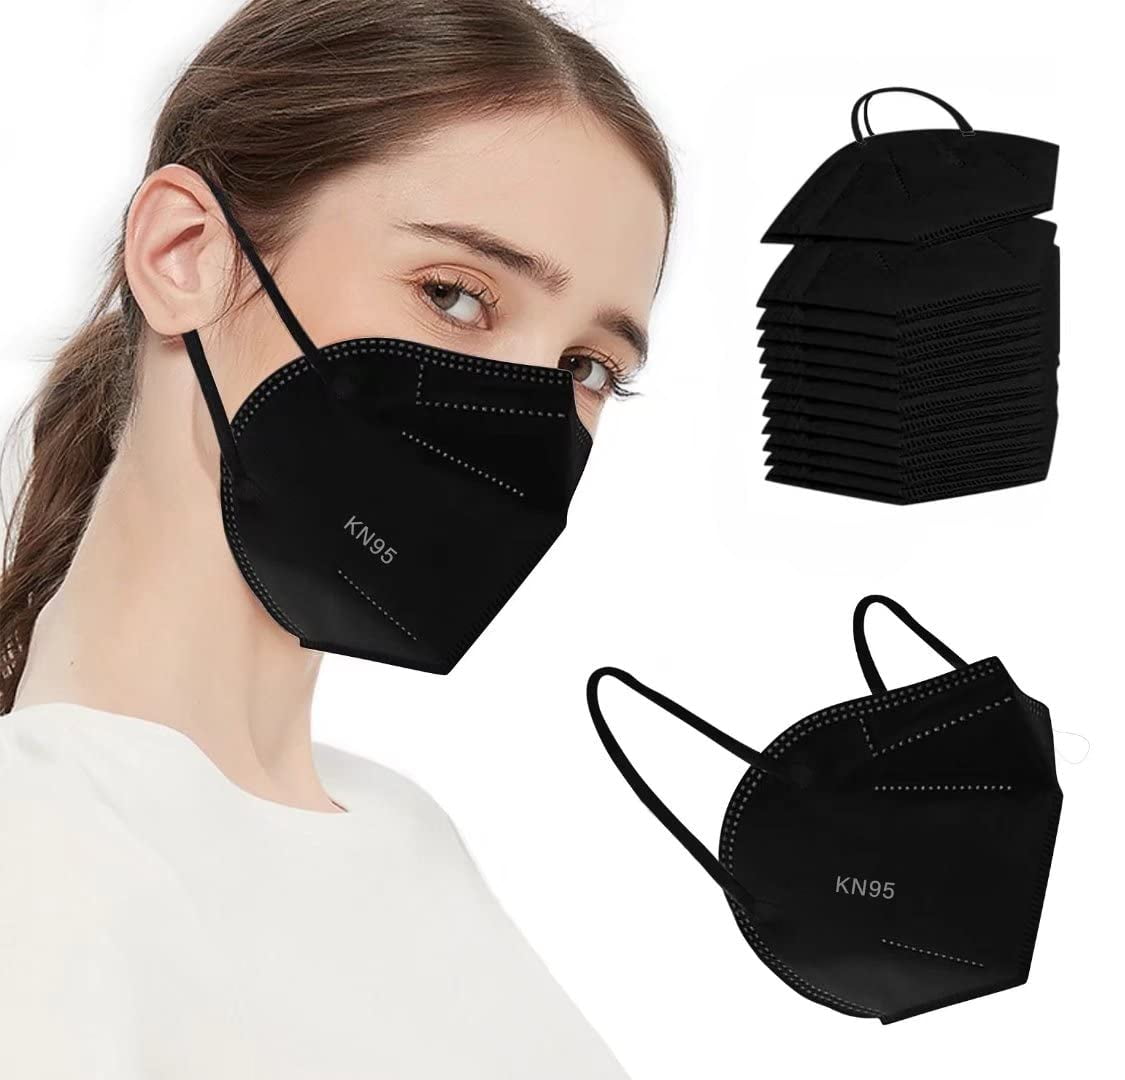 5Ply Black Disposable Mask 50cts not for medical use - Walmart.com